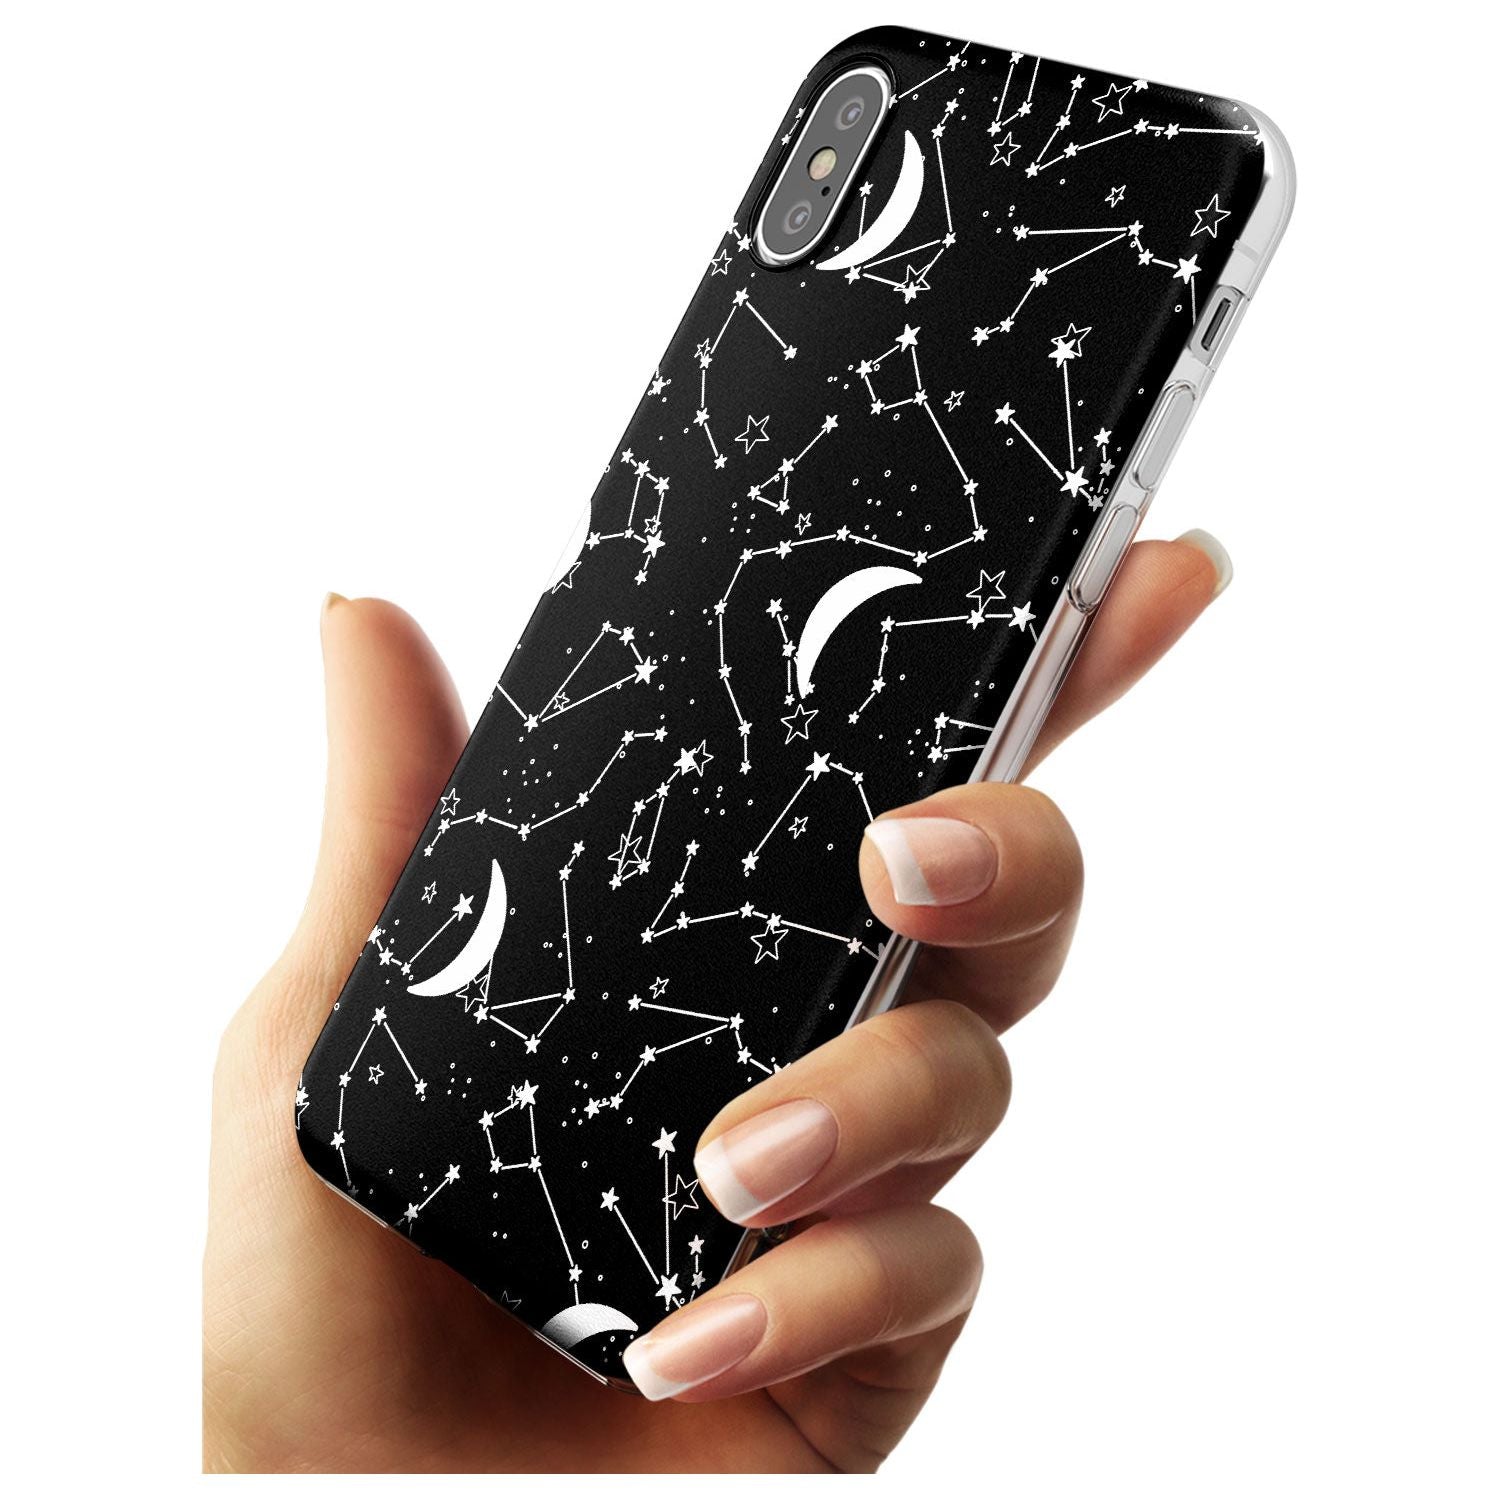 White Constellations on Black Black Impact Phone Case for iPhone X XS Max XR